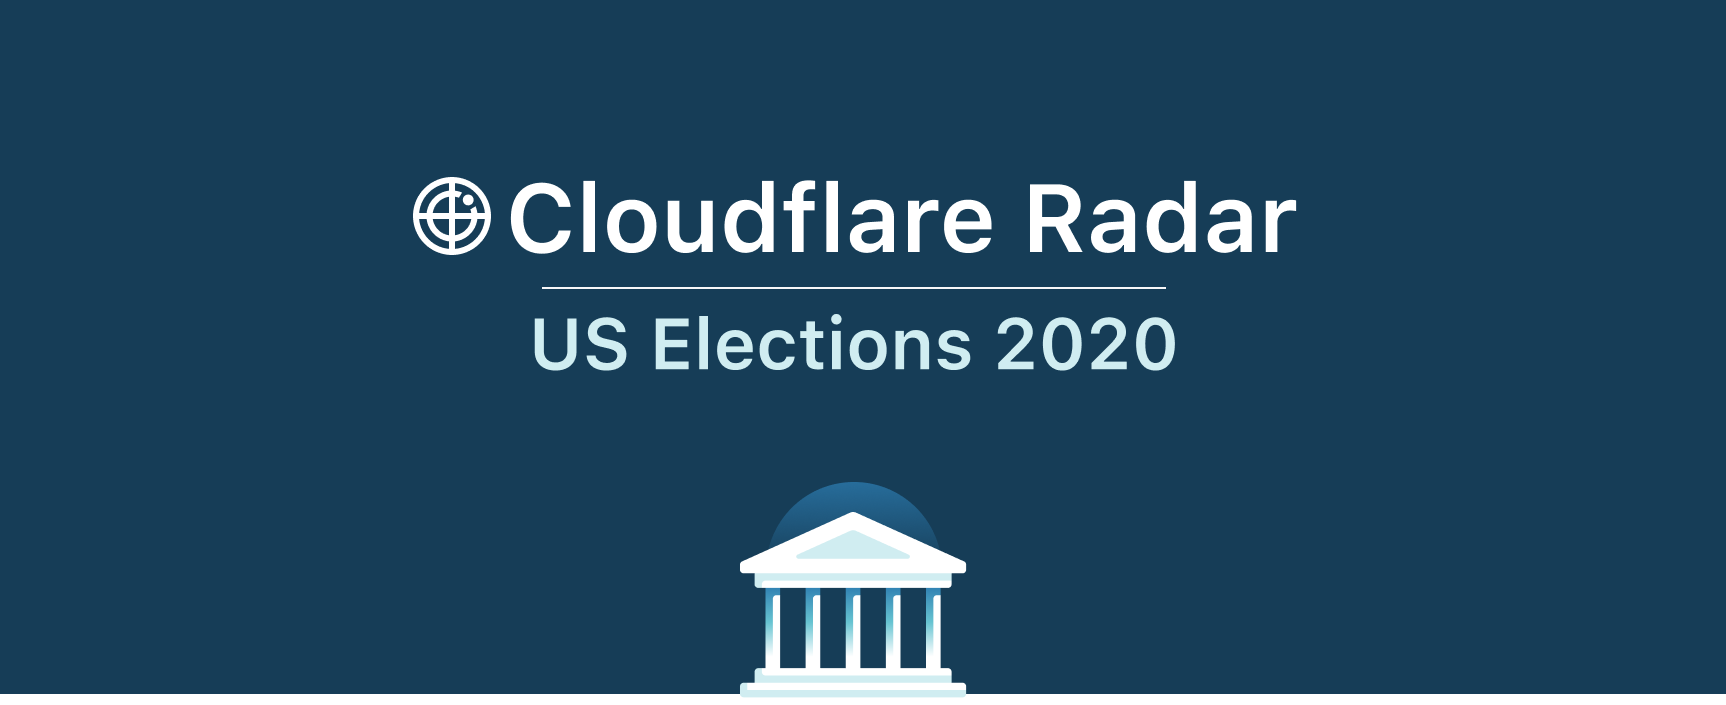 The Cloudflare Radar 2020 Elections Dashboard